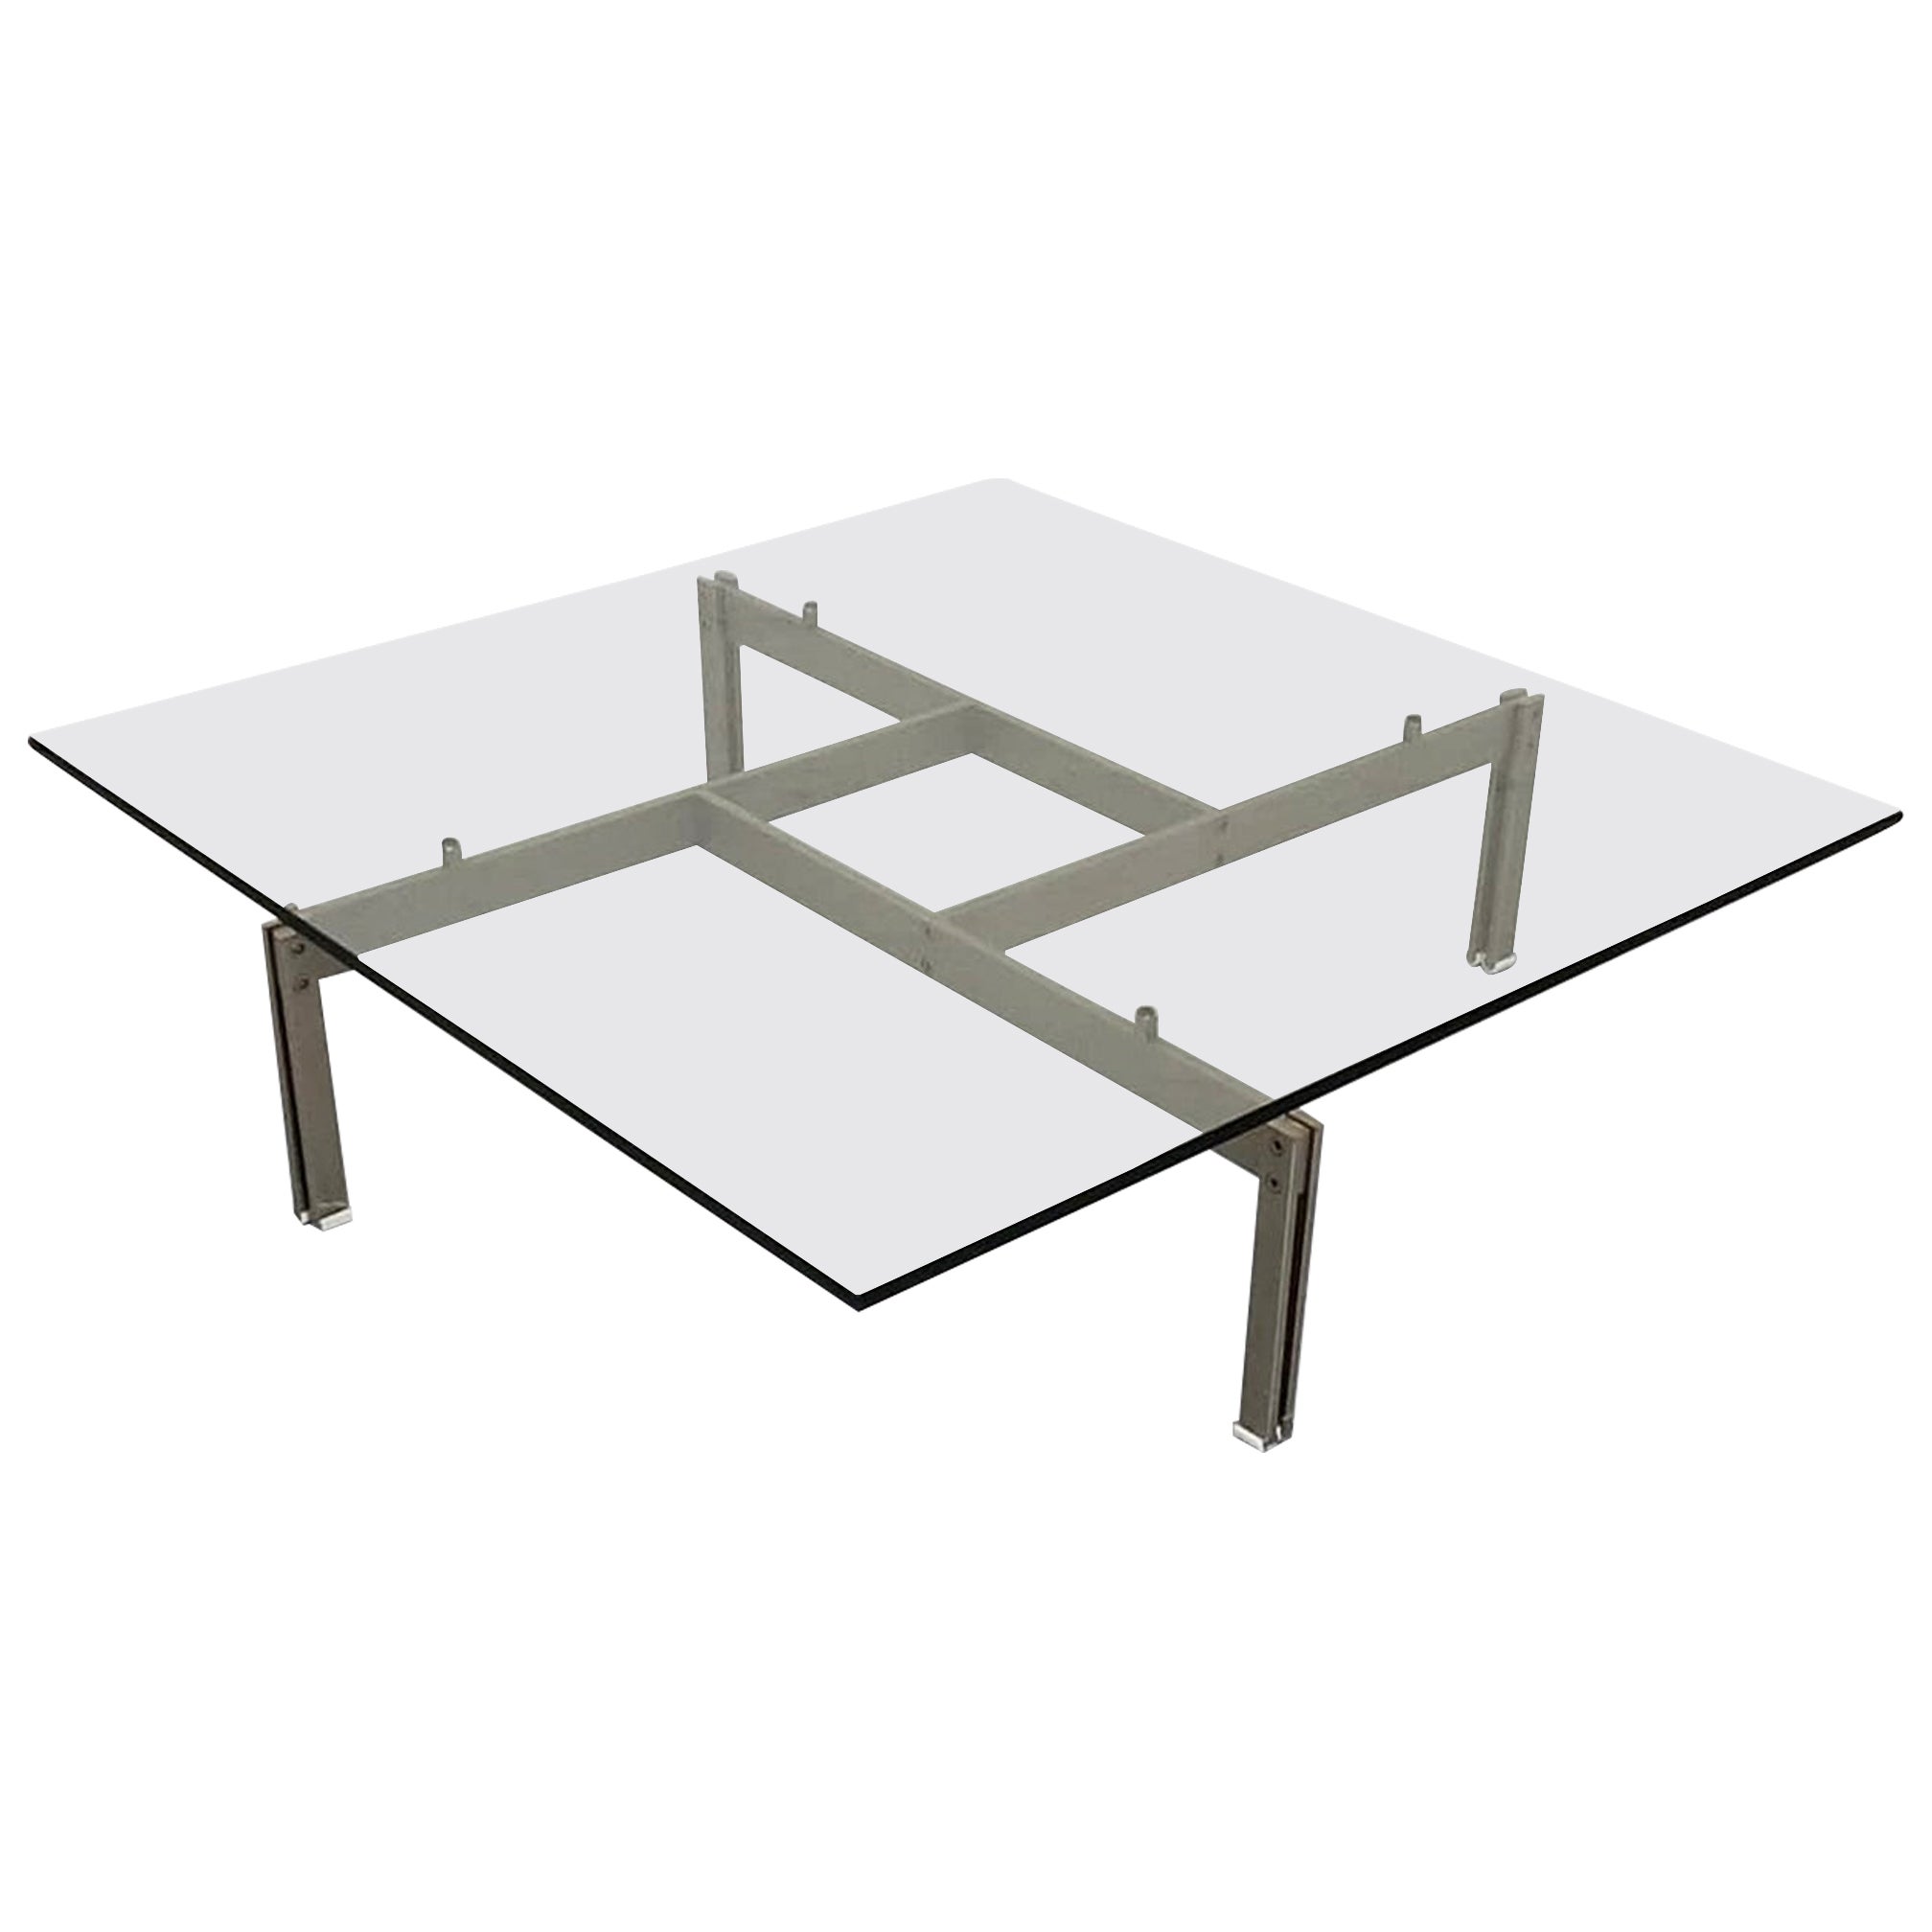 Onda Brushed Steel and Glass Coffee Table by Giovanni Offredi for Saporiti 1970s For Sale